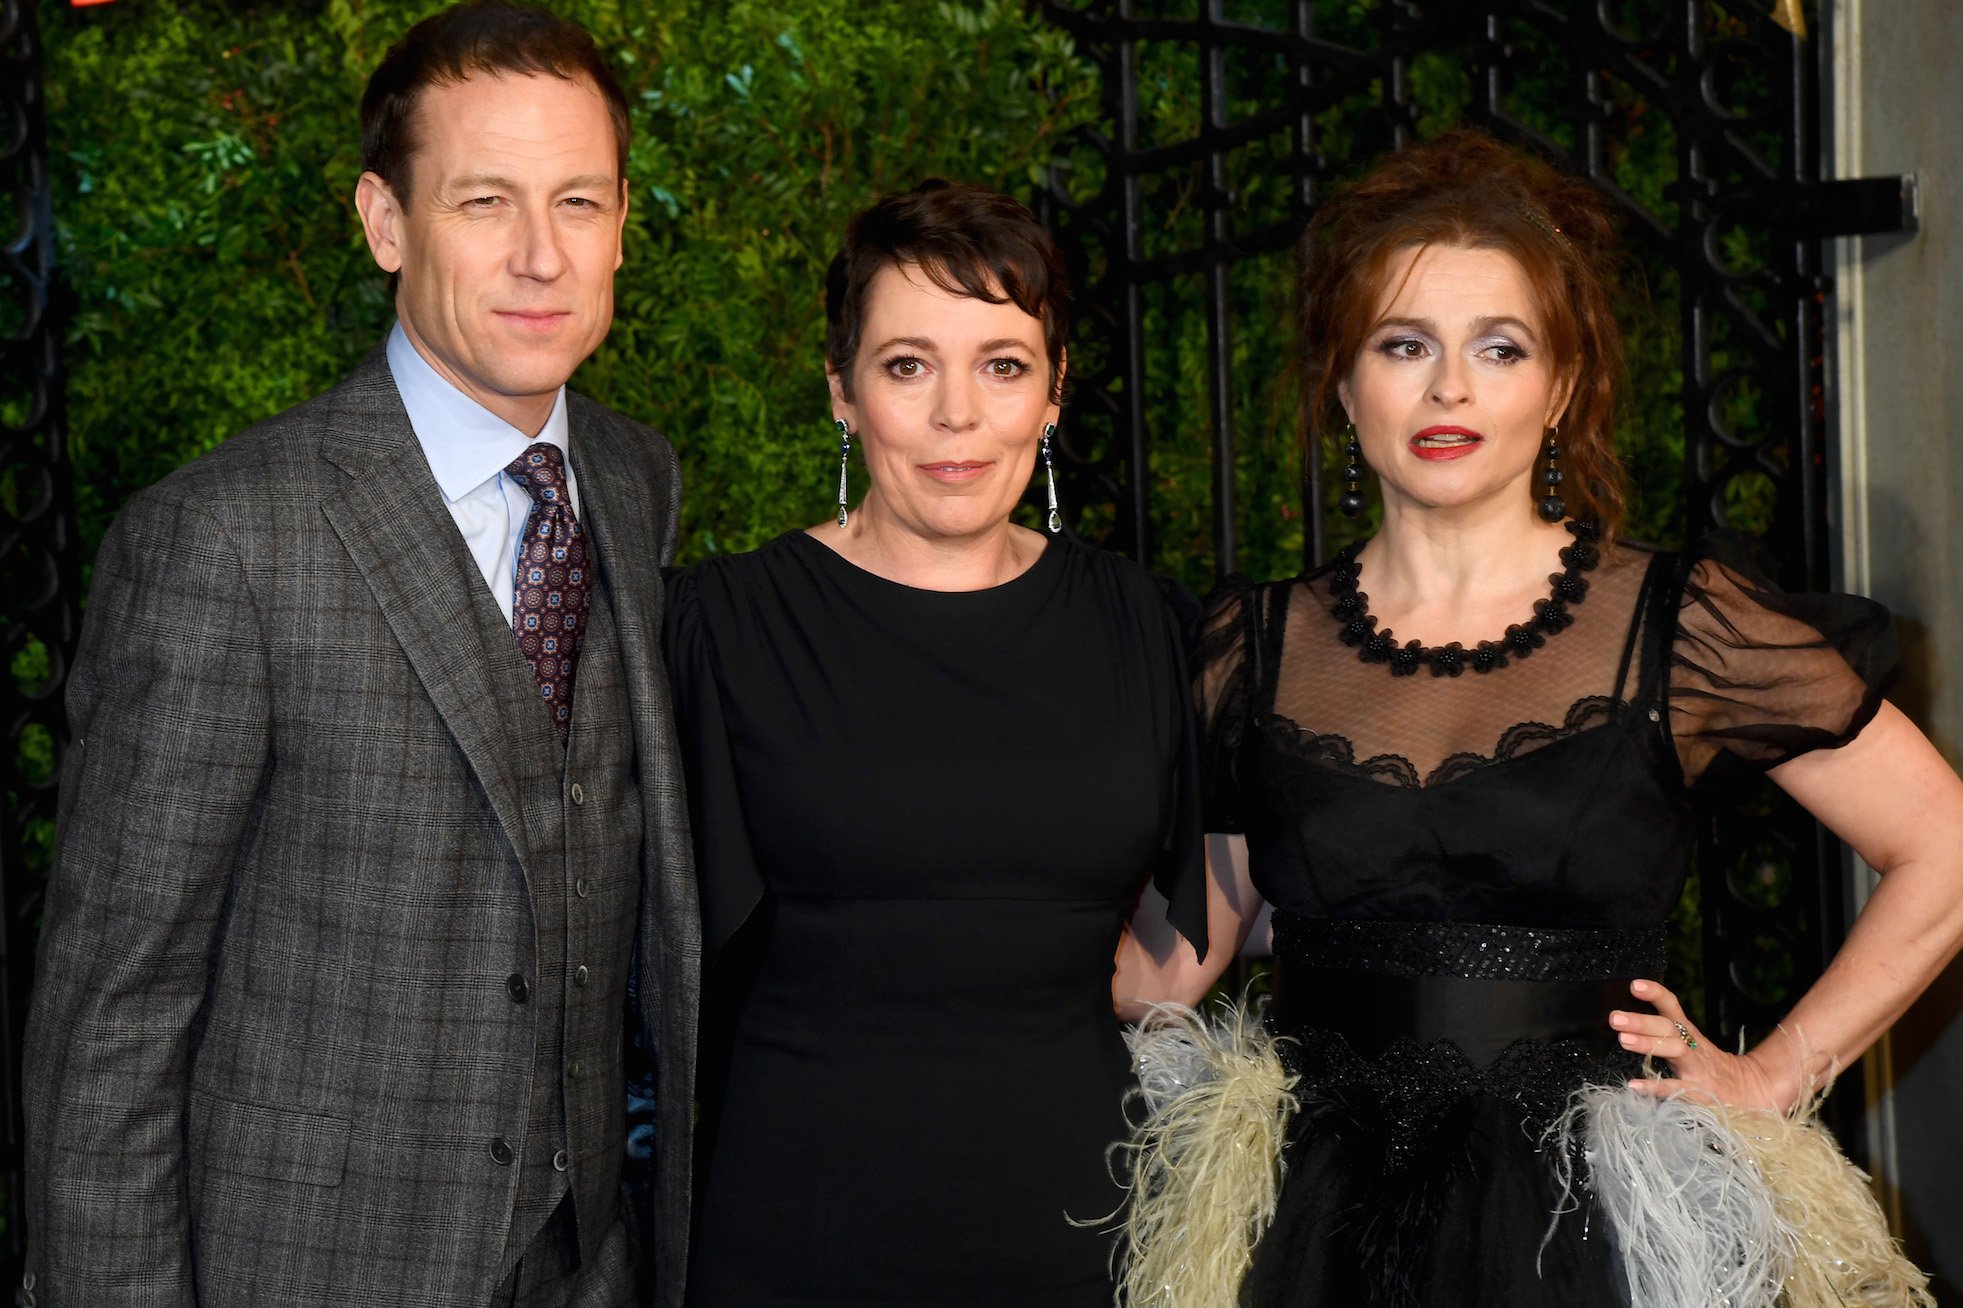 Cast of 'The Crown': Olivia Colman, Tobias Menzies, and Helena Bonham Carter standing together